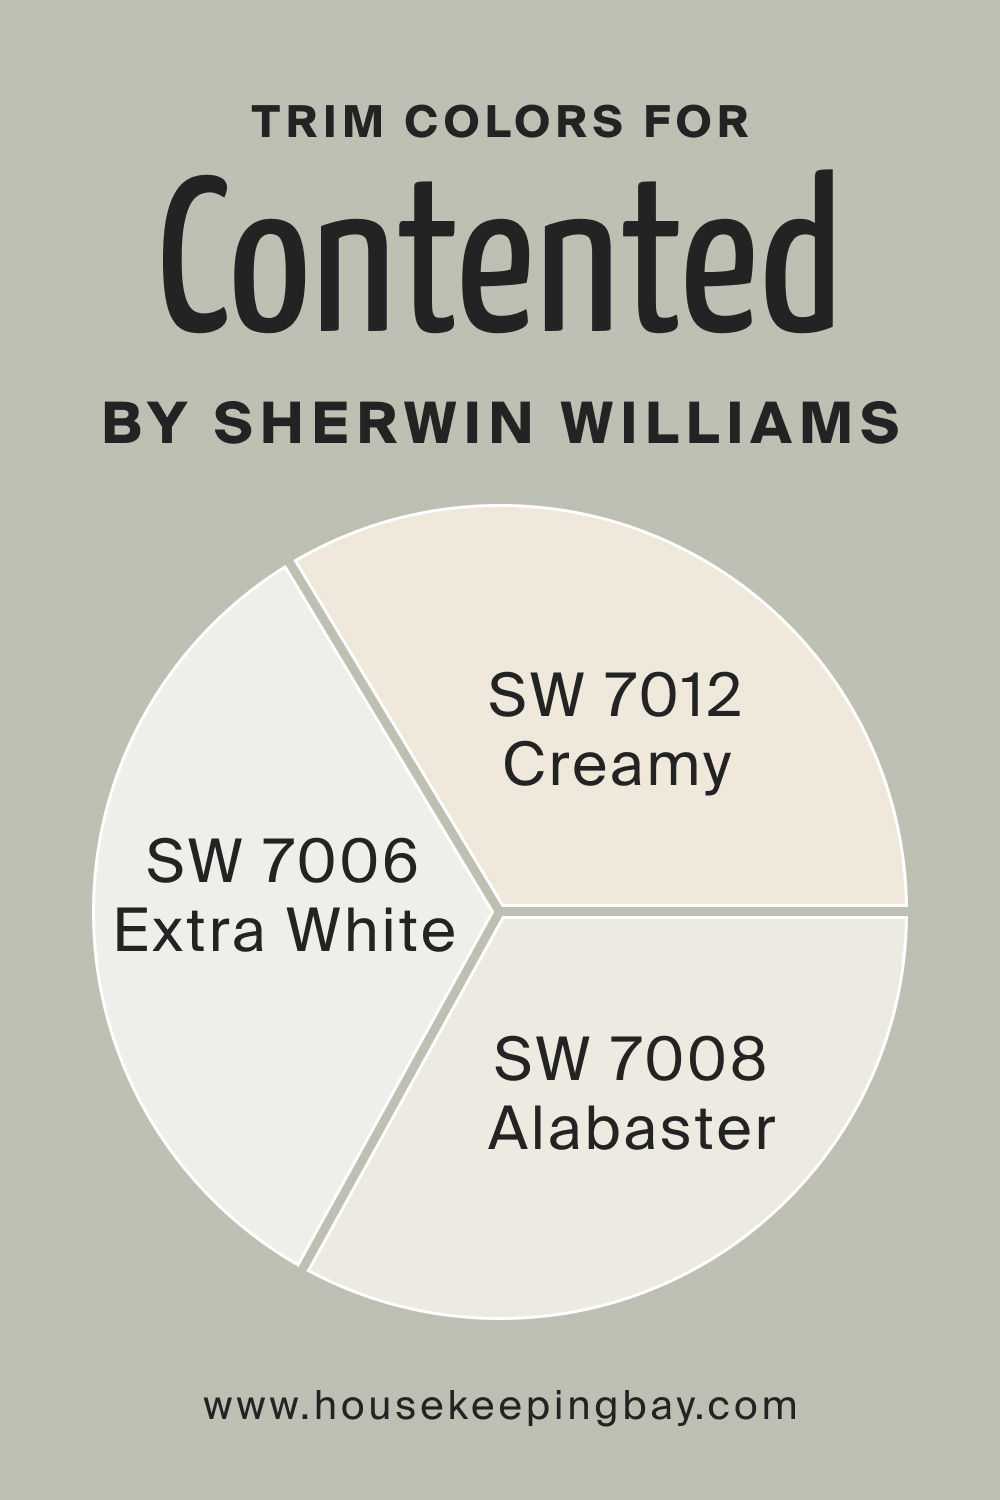 Trim Colors of SW 6191 Contented by Sherwin Williams